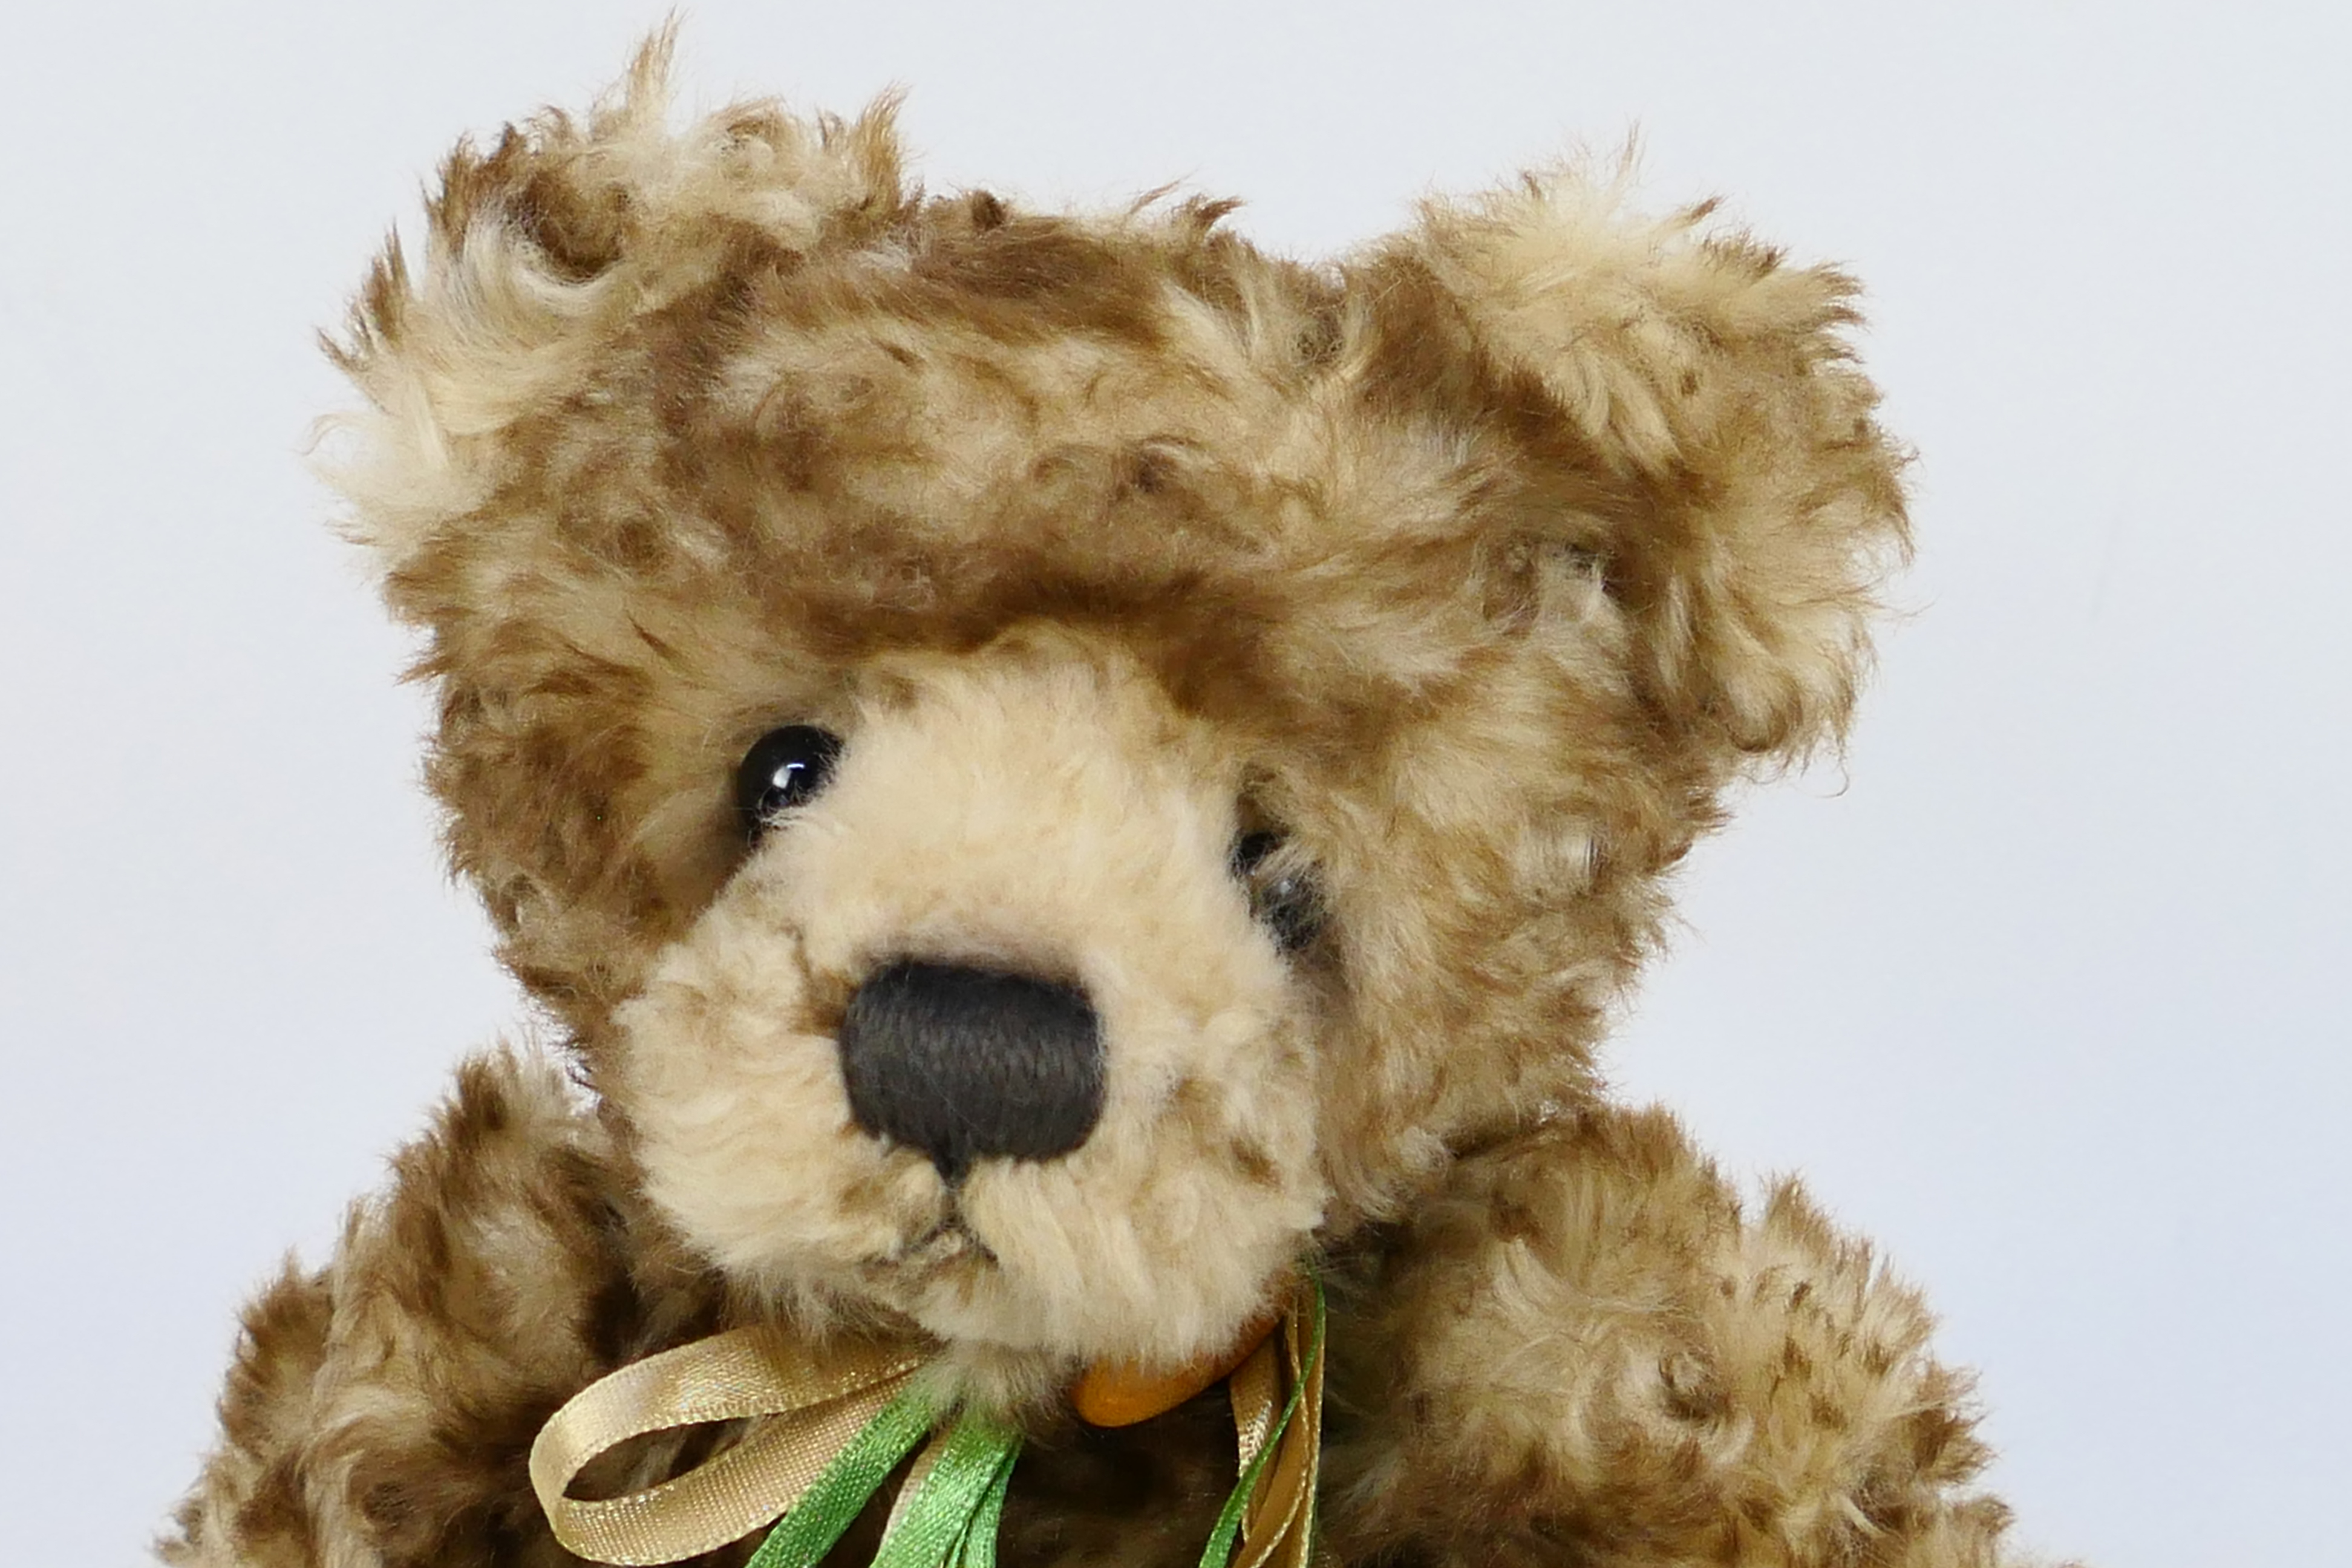 Charlie Bears - An unmarked Charlie Bears soft toy teddy bear with jointed limbs, - Image 3 of 5